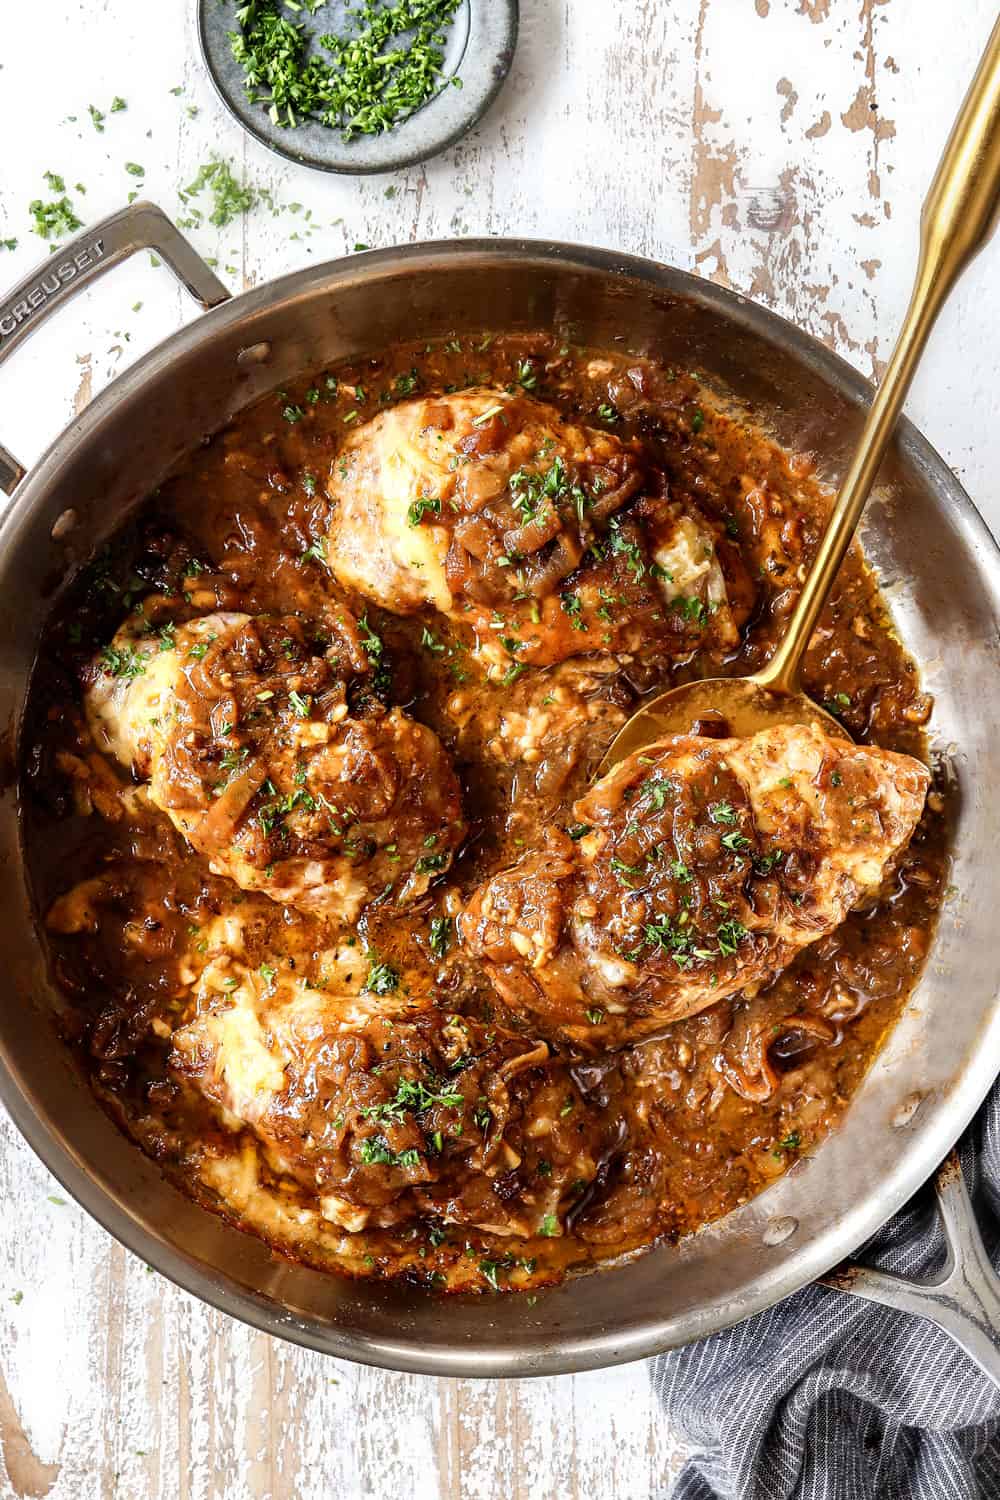 https://carlsbadcravings.com/wp-content/uploads/2021/03/French-Onion-Chicken-featured.jpg